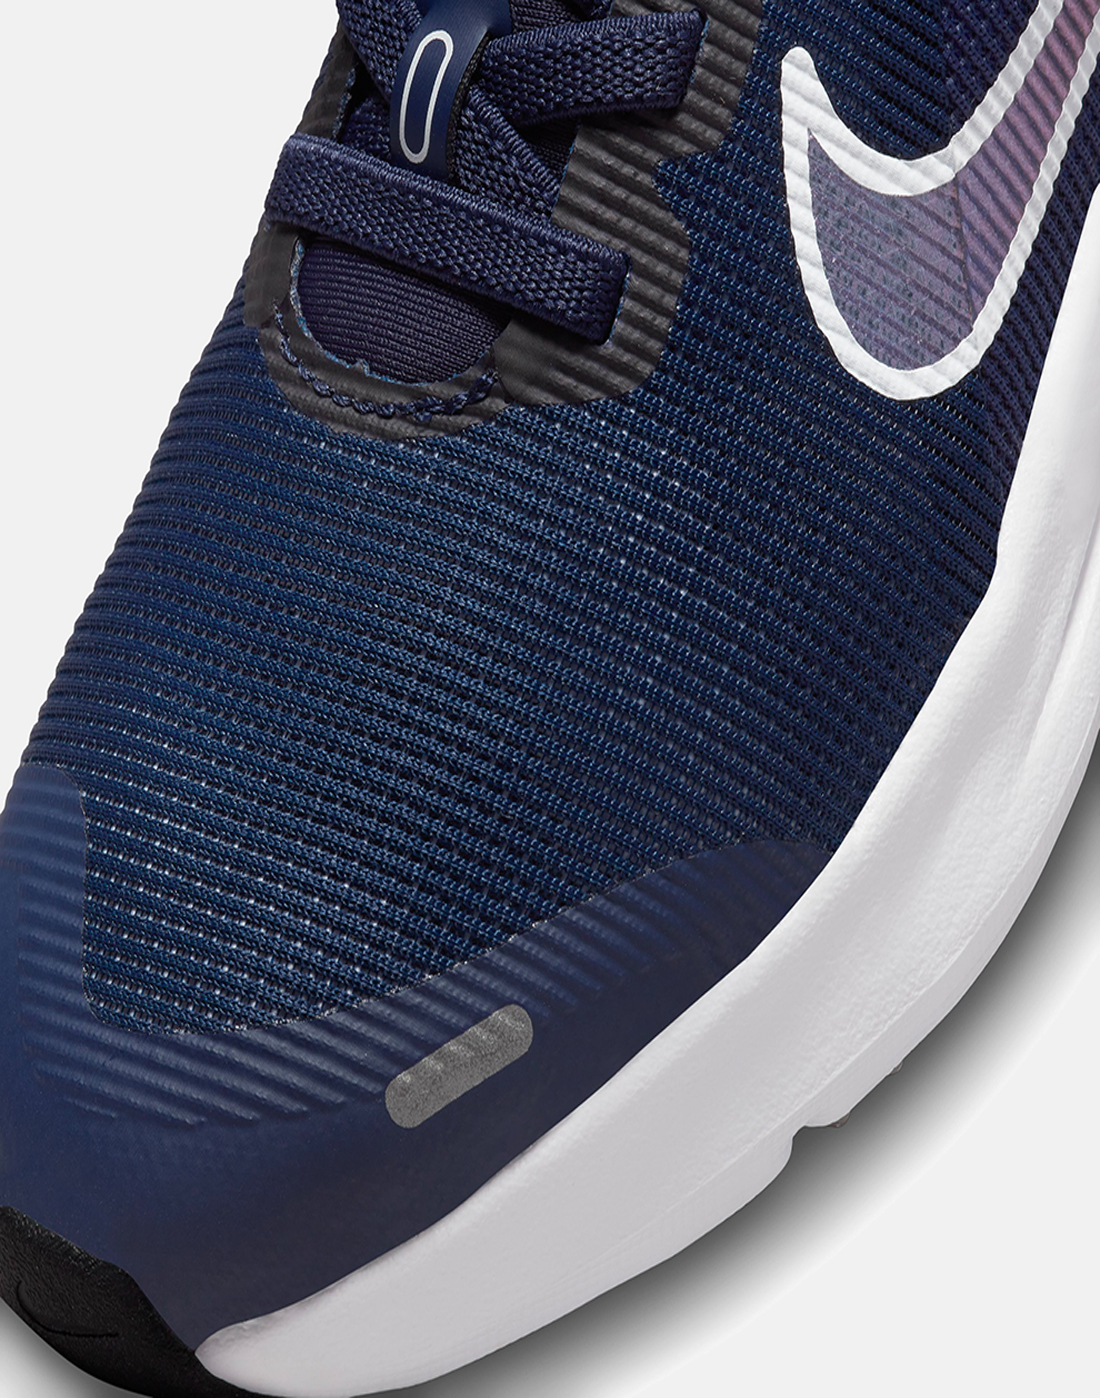 Nike Younger Boys Downshifter 12 - Navy | Life Style Sports IE